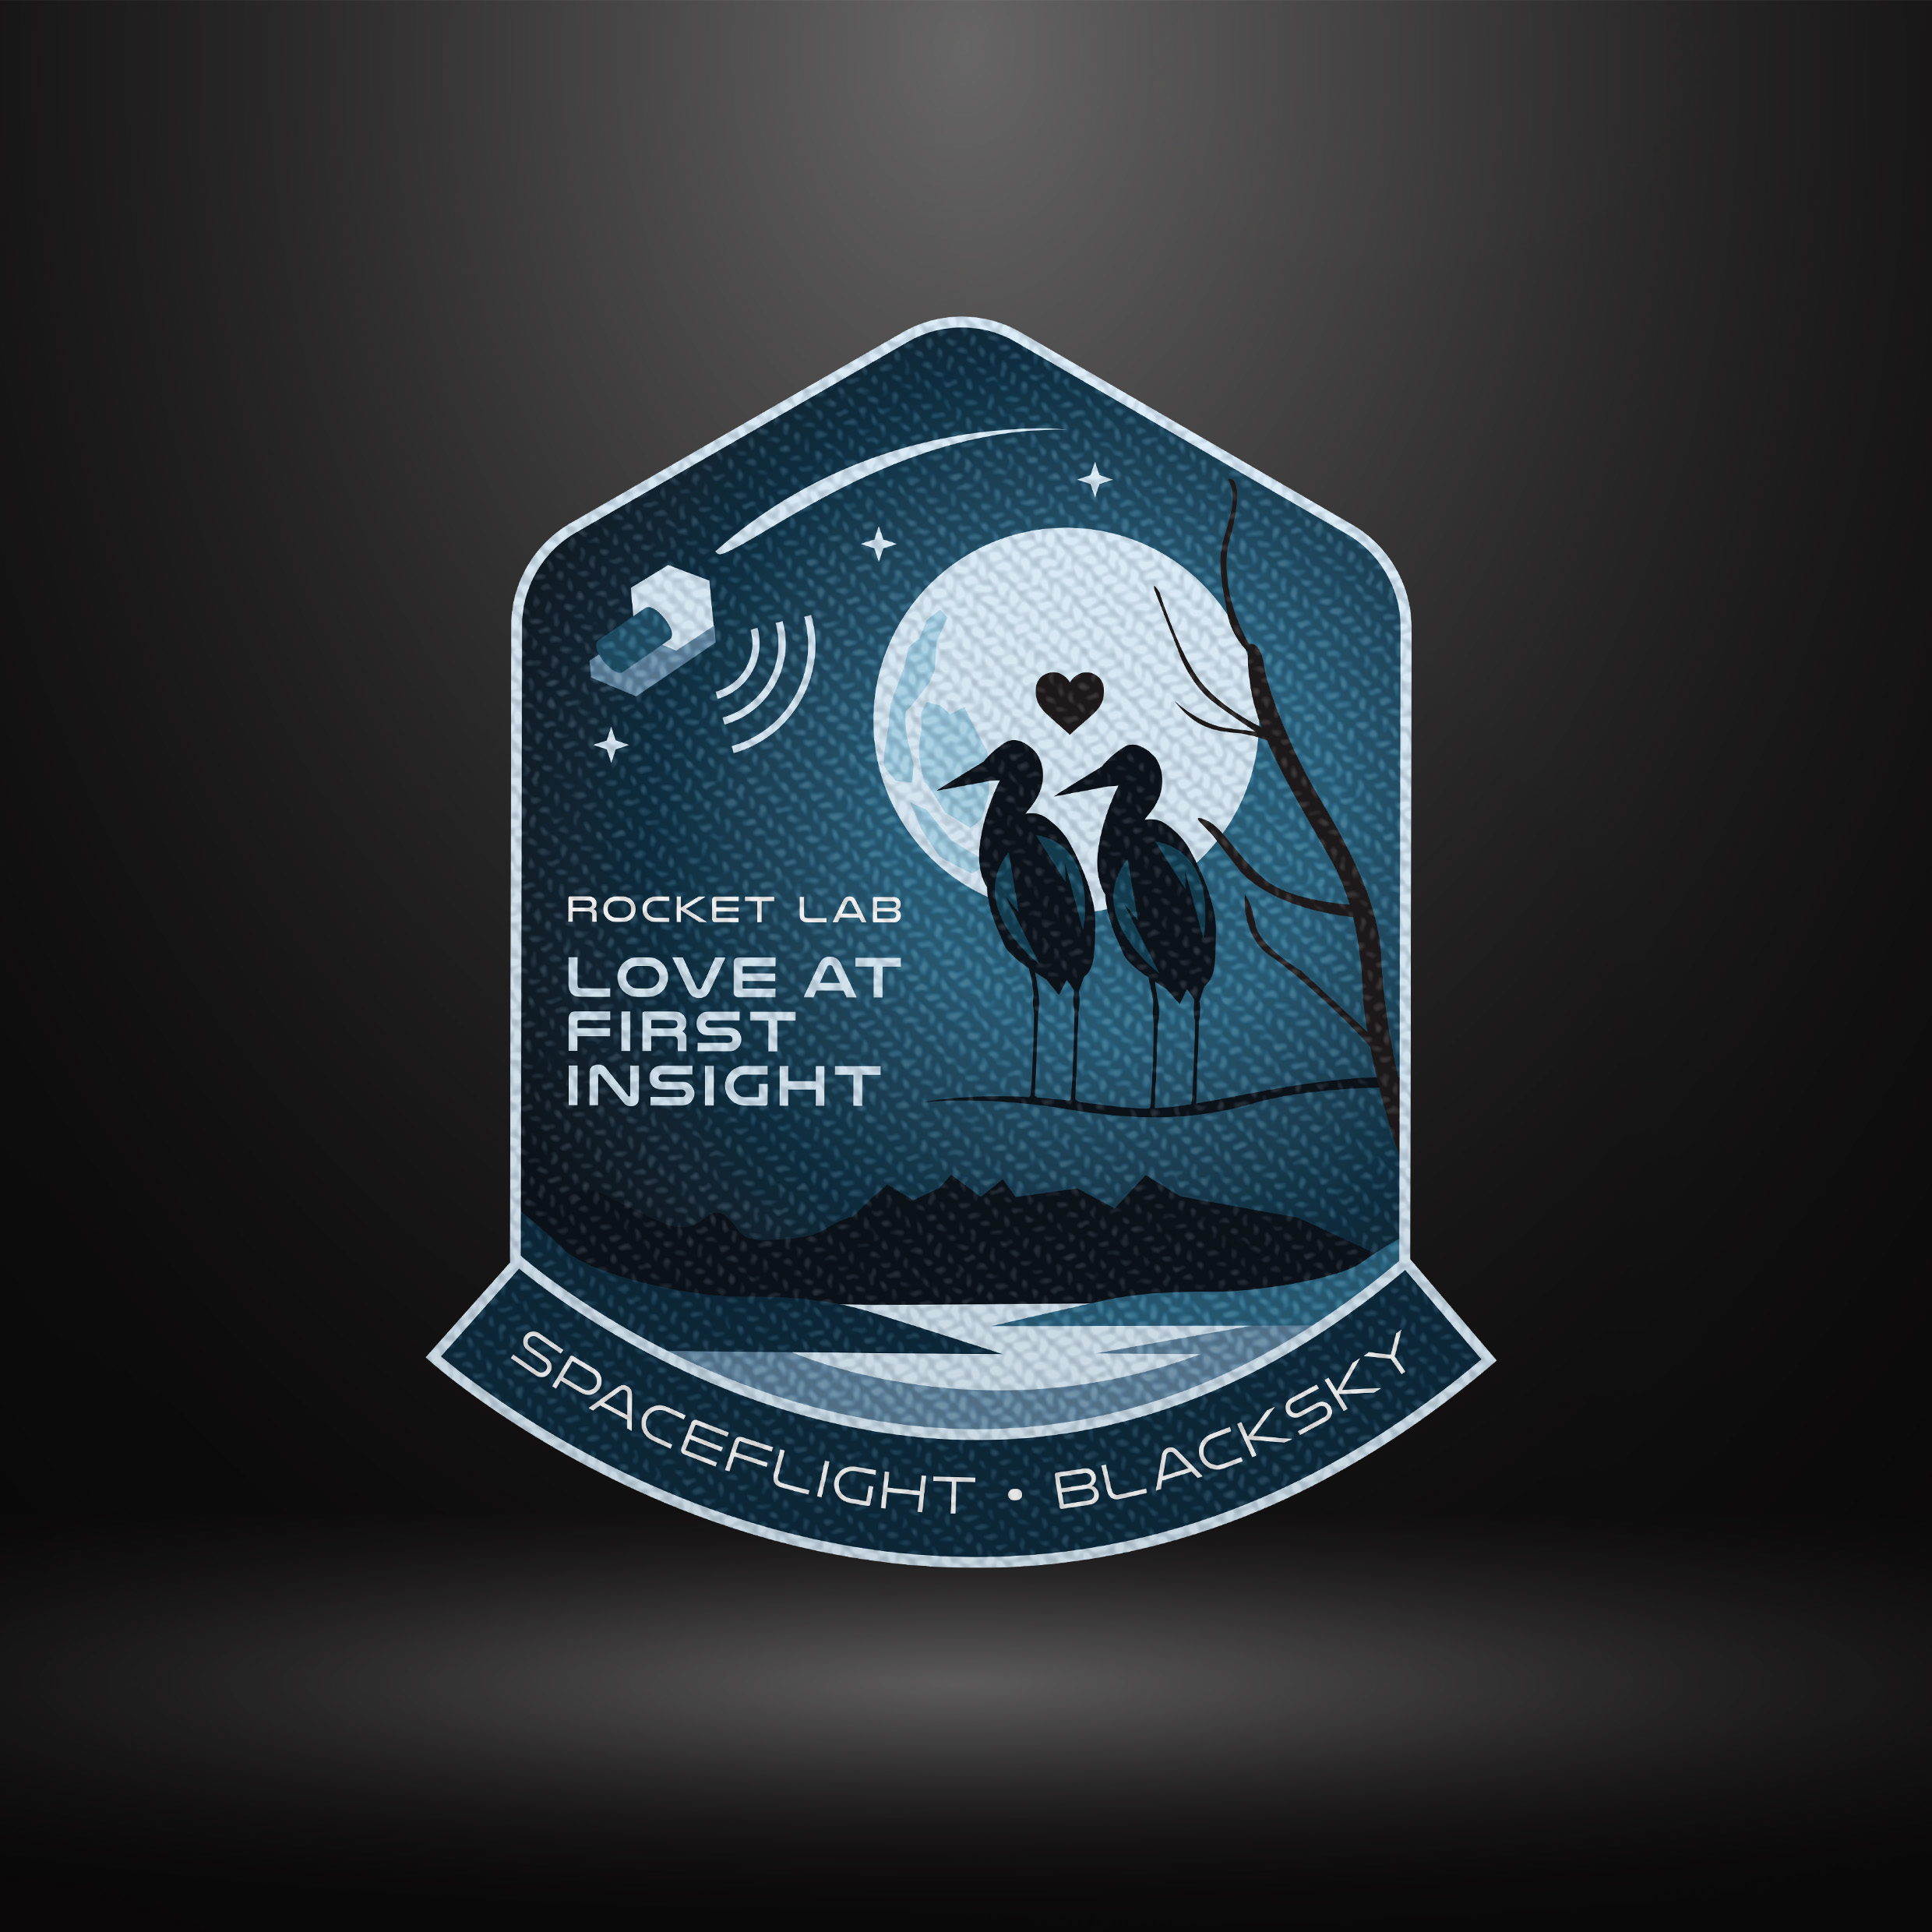 Rocket Lab Launch Operations Underway For Two BlackSky Missions in November 